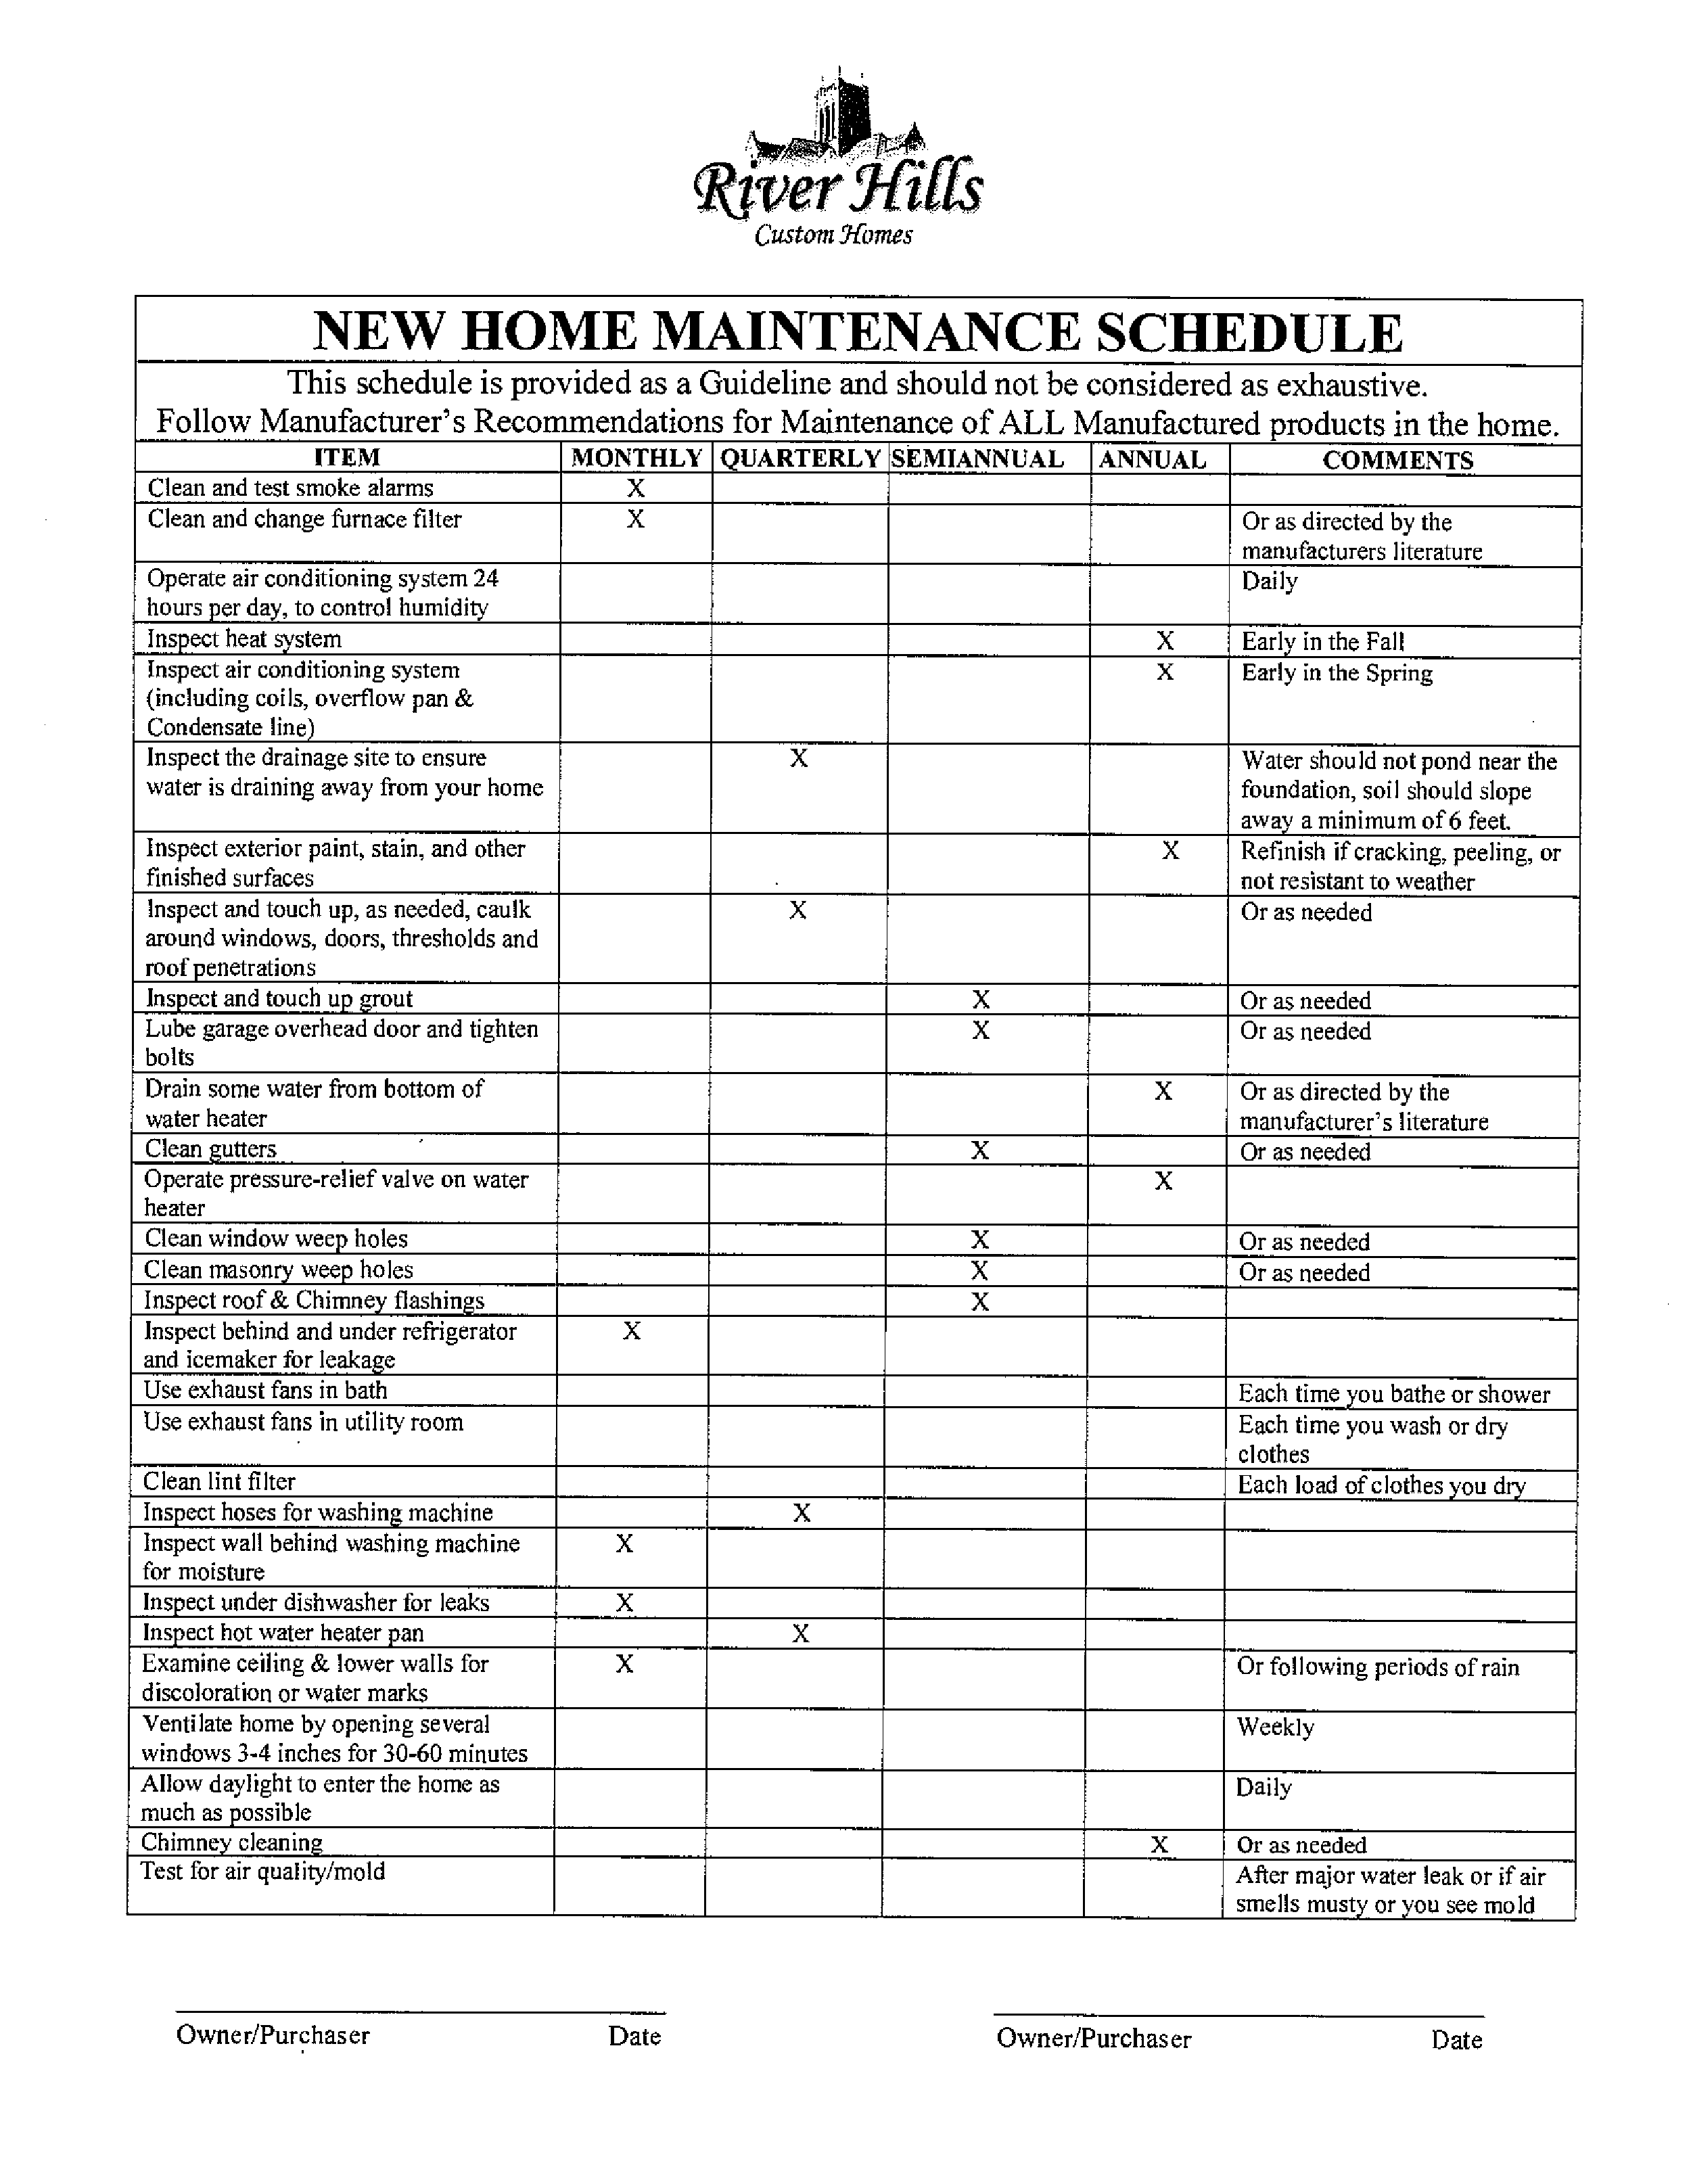 New Home Maintenance Schedule main image